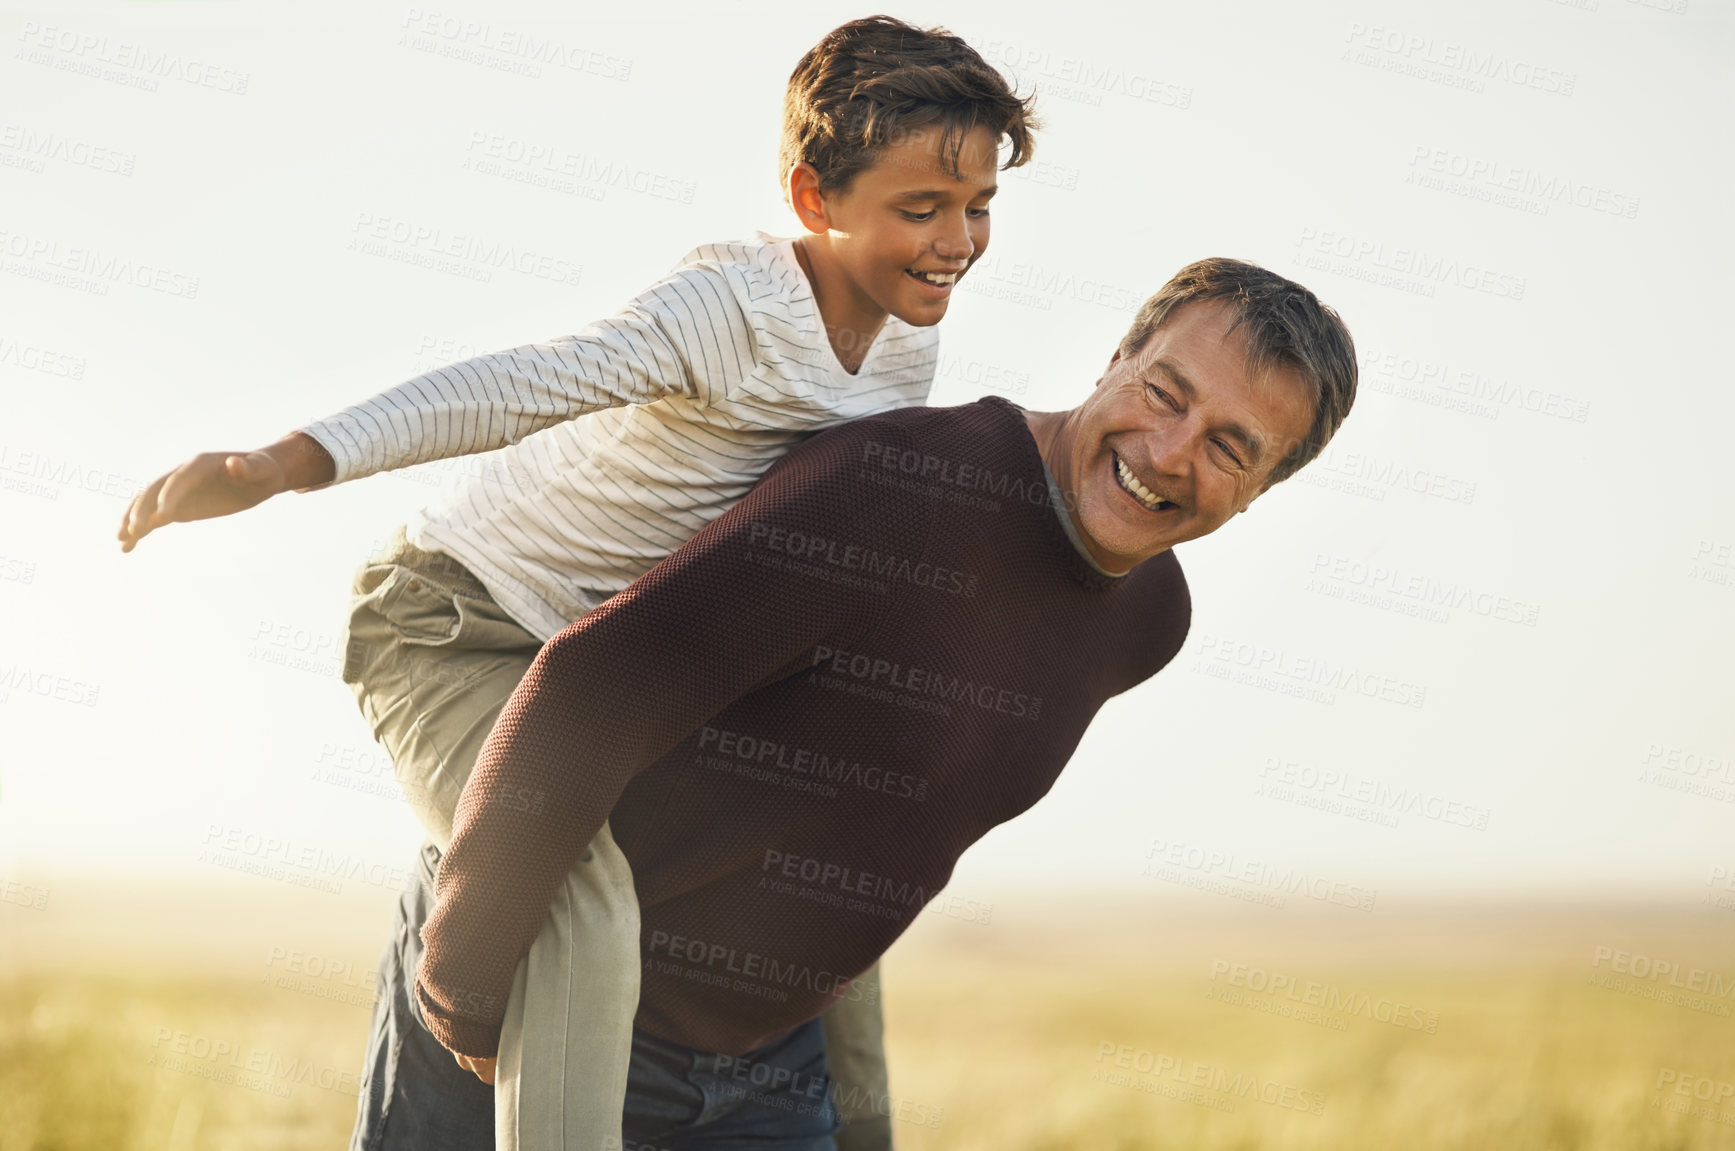 Buy stock photo Shot of a father and son having a good time as the father piggybacks his son